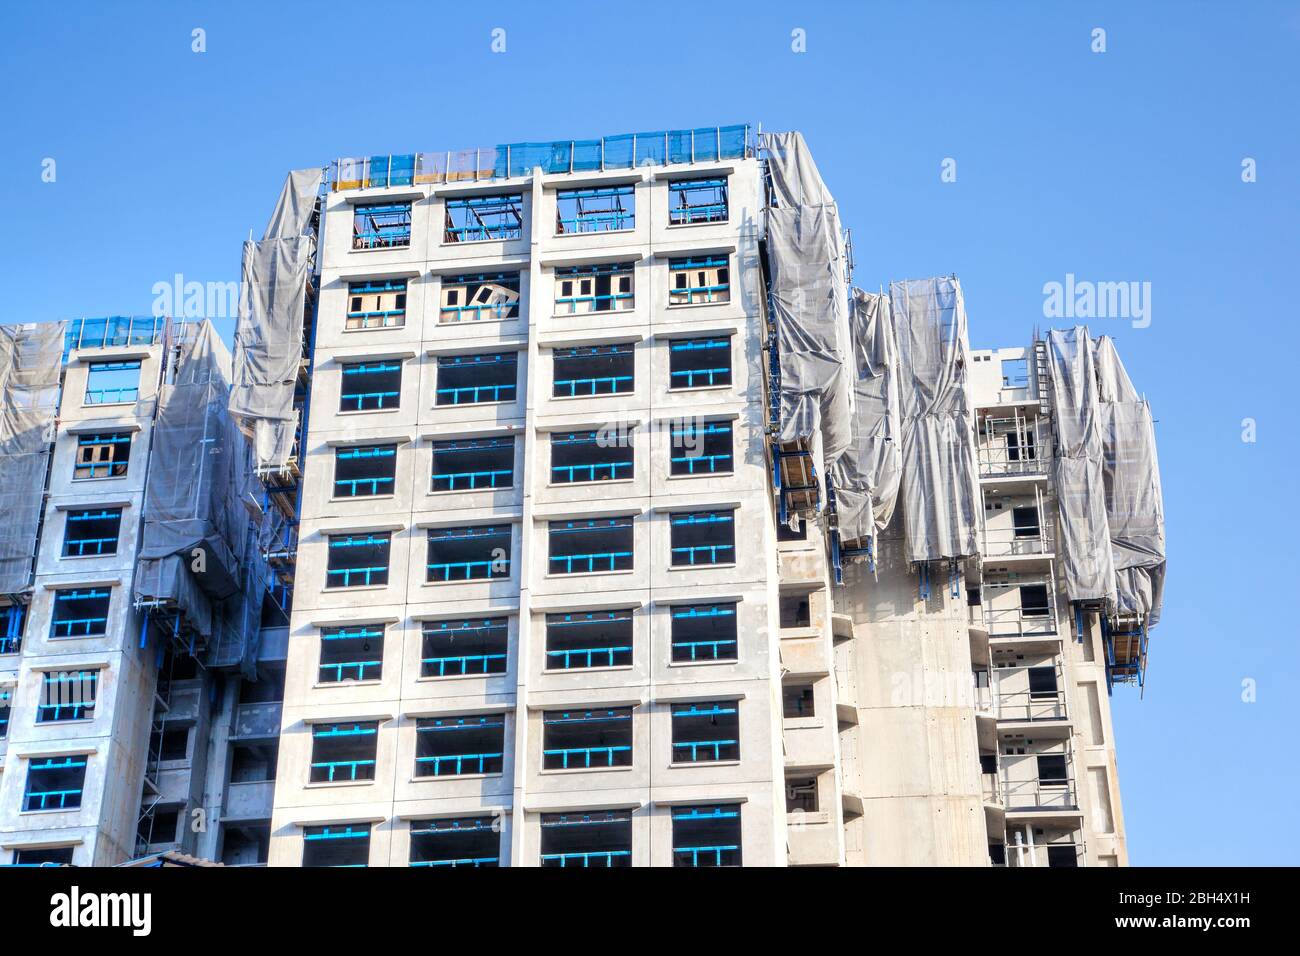 Singapore BTO or Built to Order public housing flats under construction. Most of the residential housing developments in Singapore are publicly govern Stock Photo